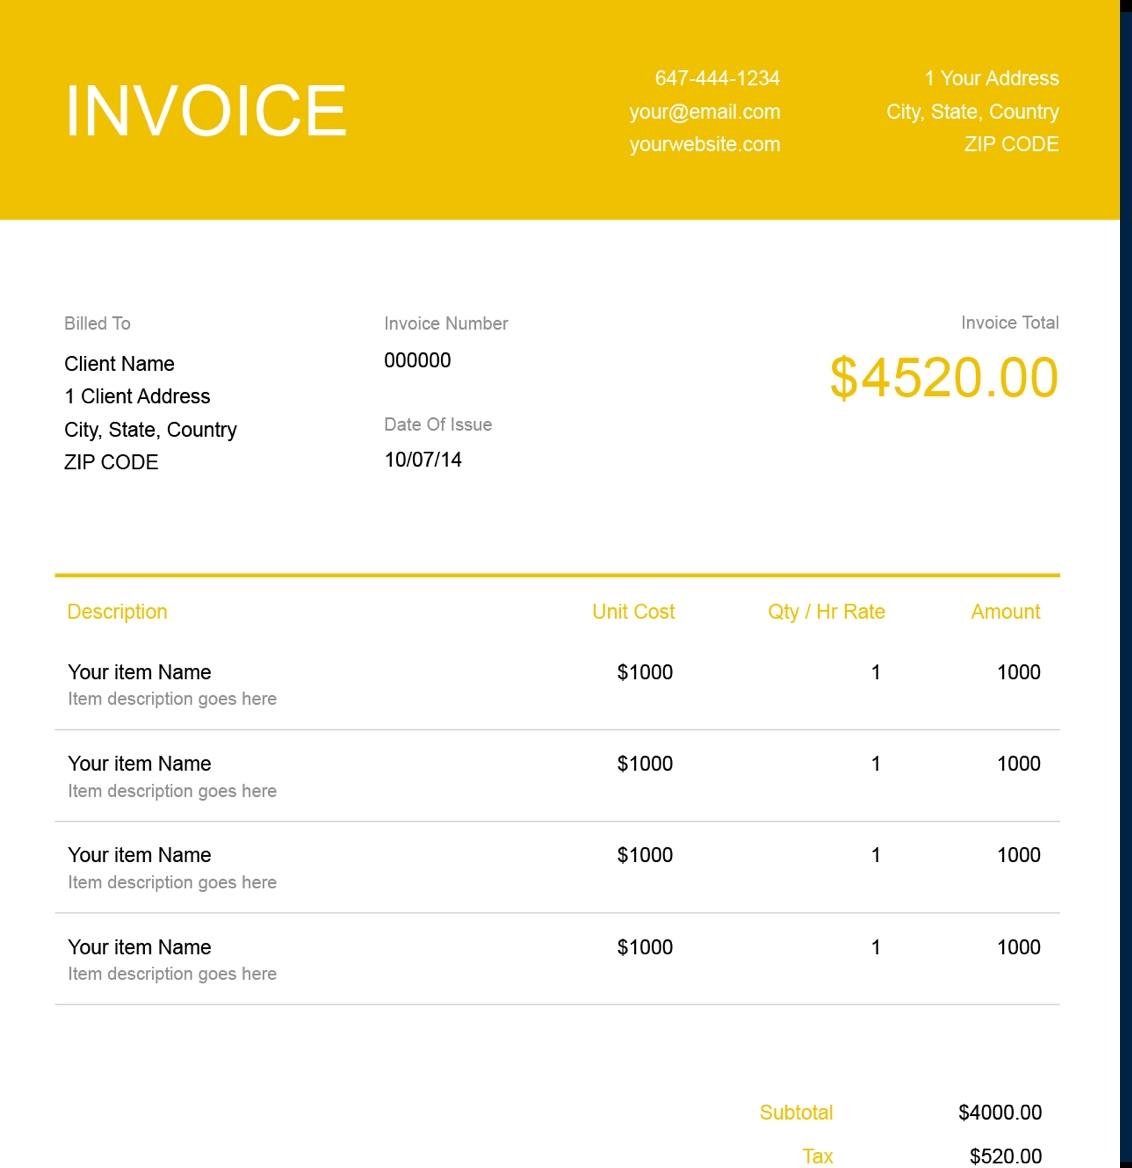 Plumbing Heating & Cooling Invoices